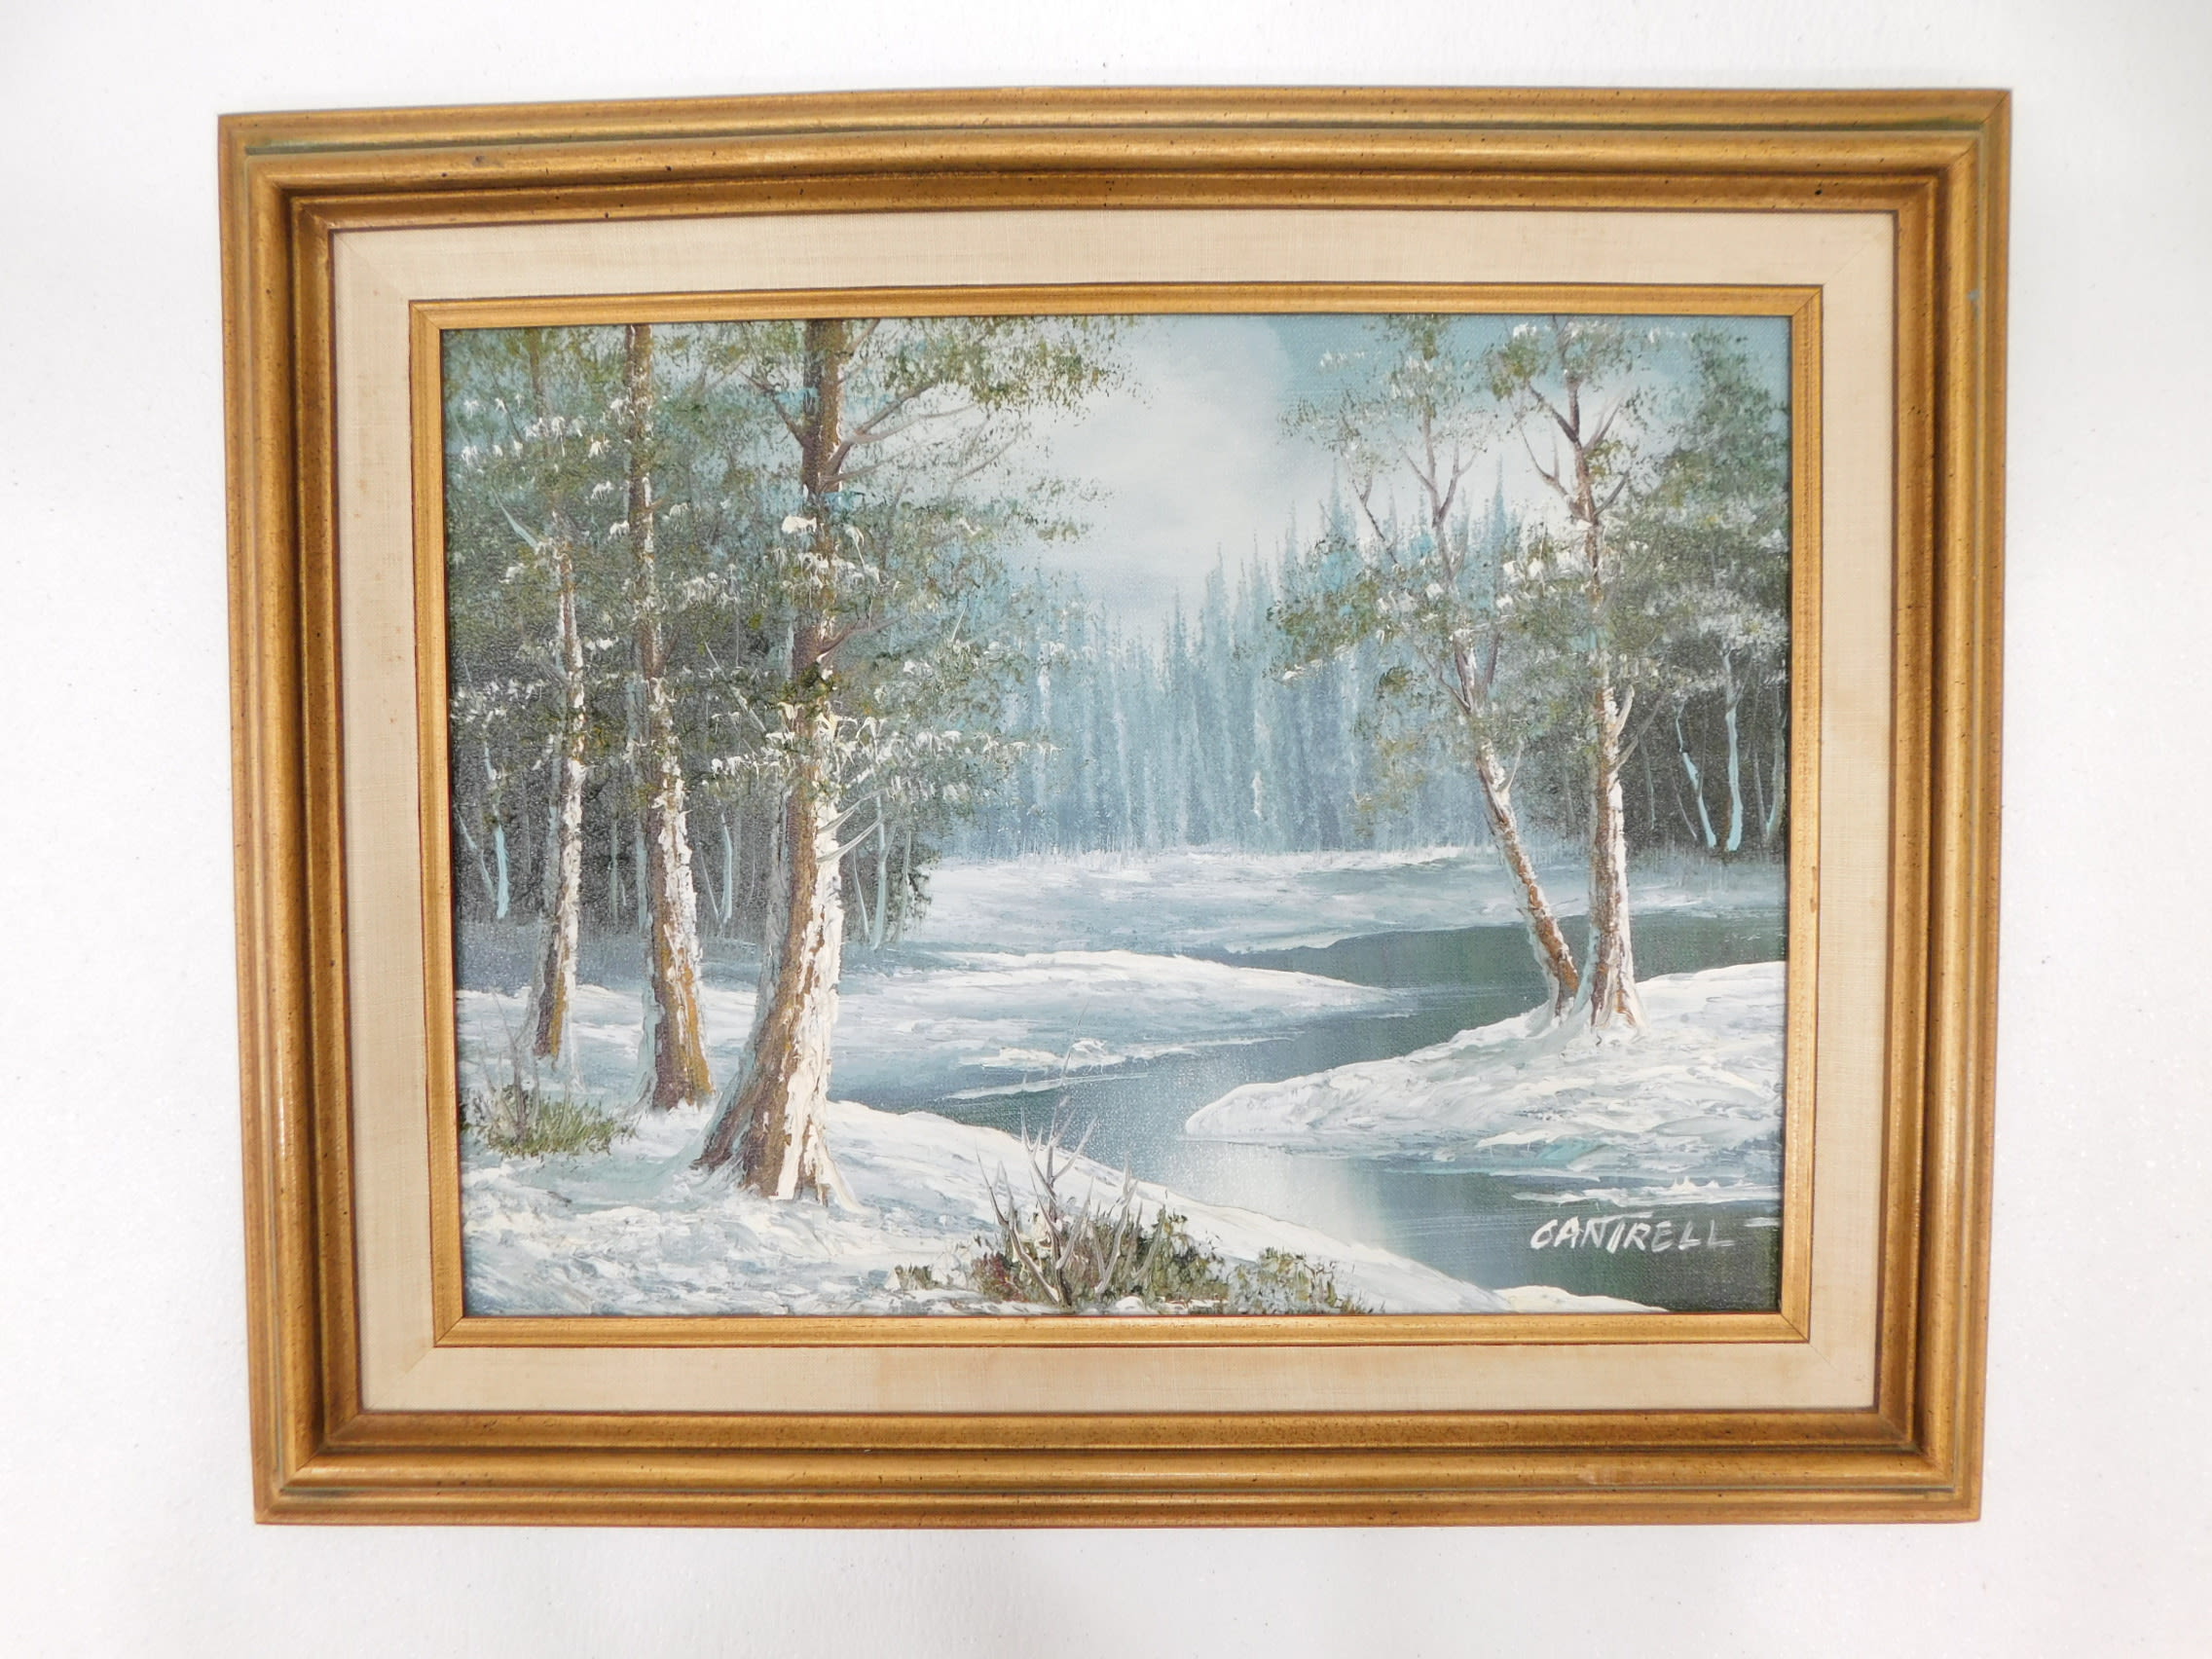 Buy the Phillip Cantrell Winter Landscape Signed 16 x 12 Oil On Canvas ...